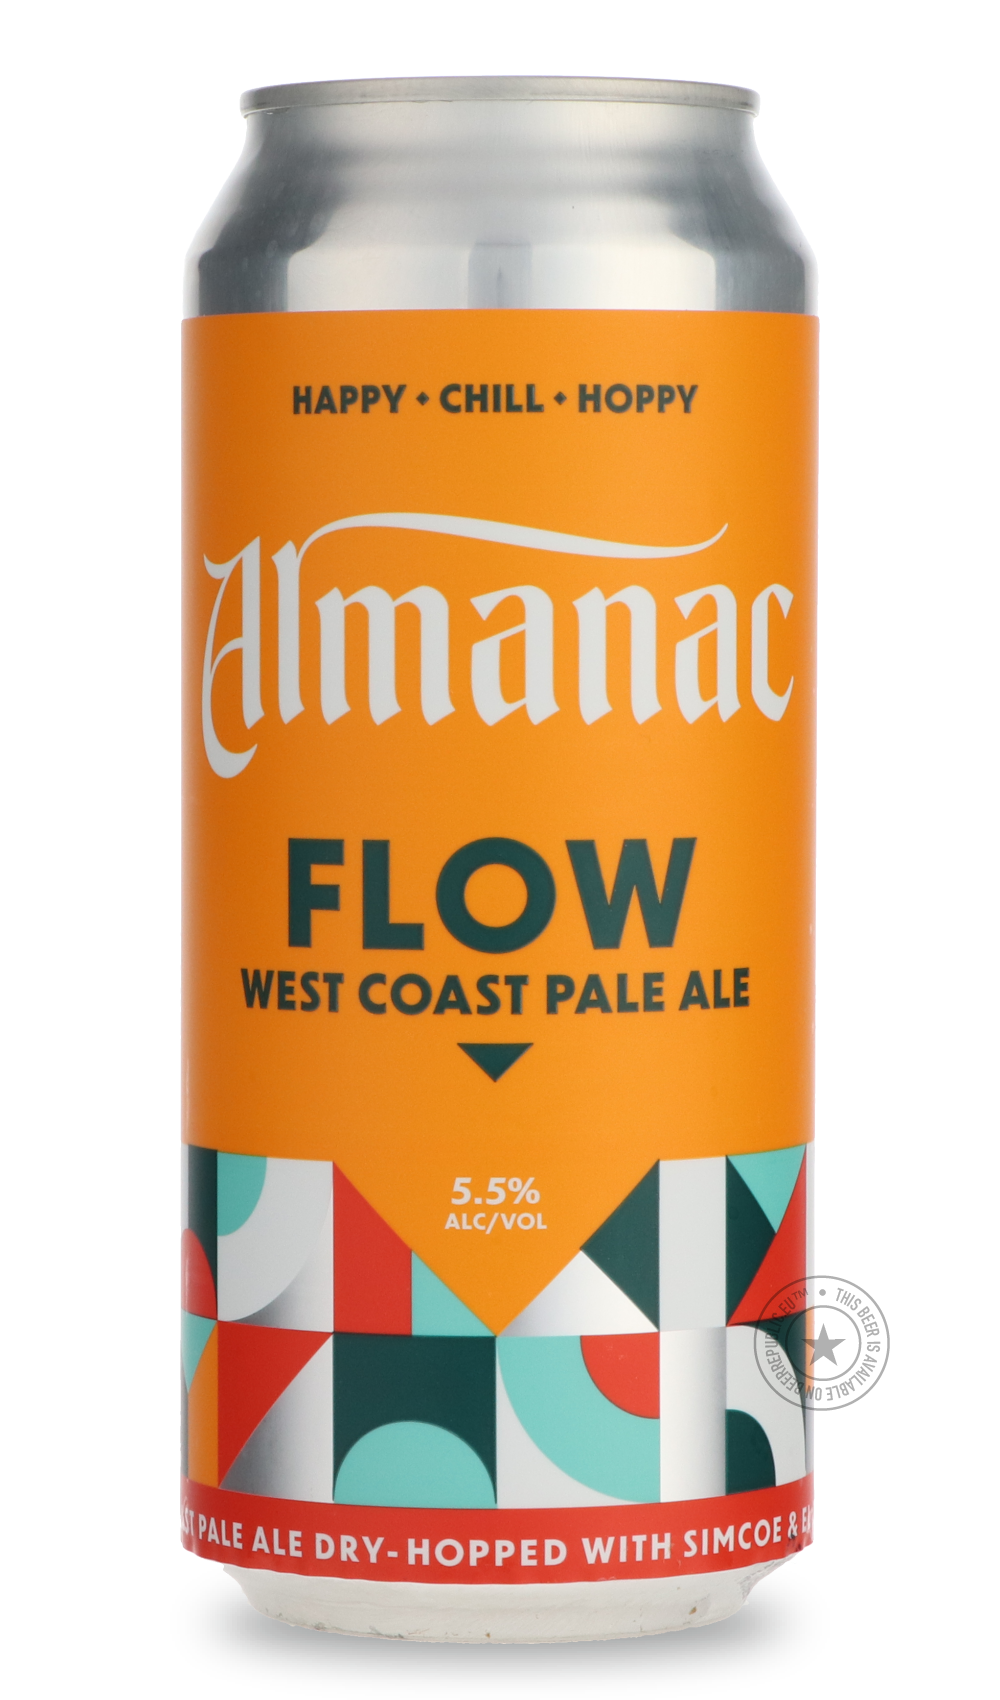 -Almanac- Flow-Pale- Only @ Beer Republic - The best online beer store for American & Canadian craft beer - Buy beer online from the USA and Canada - Bier online kopen - Amerikaans bier kopen - Craft beer store - Craft beer kopen - Amerikanisch bier kaufen - Bier online kaufen - Acheter biere online - IPA - Stout - Porter - New England IPA - Hazy IPA - Imperial Stout - Barrel Aged - Barrel Aged Imperial Stout - Brown - Dark beer - Blond - Blonde - Pilsner - Lager - Wheat - Weizen - Amber - Barley Wine - Qua